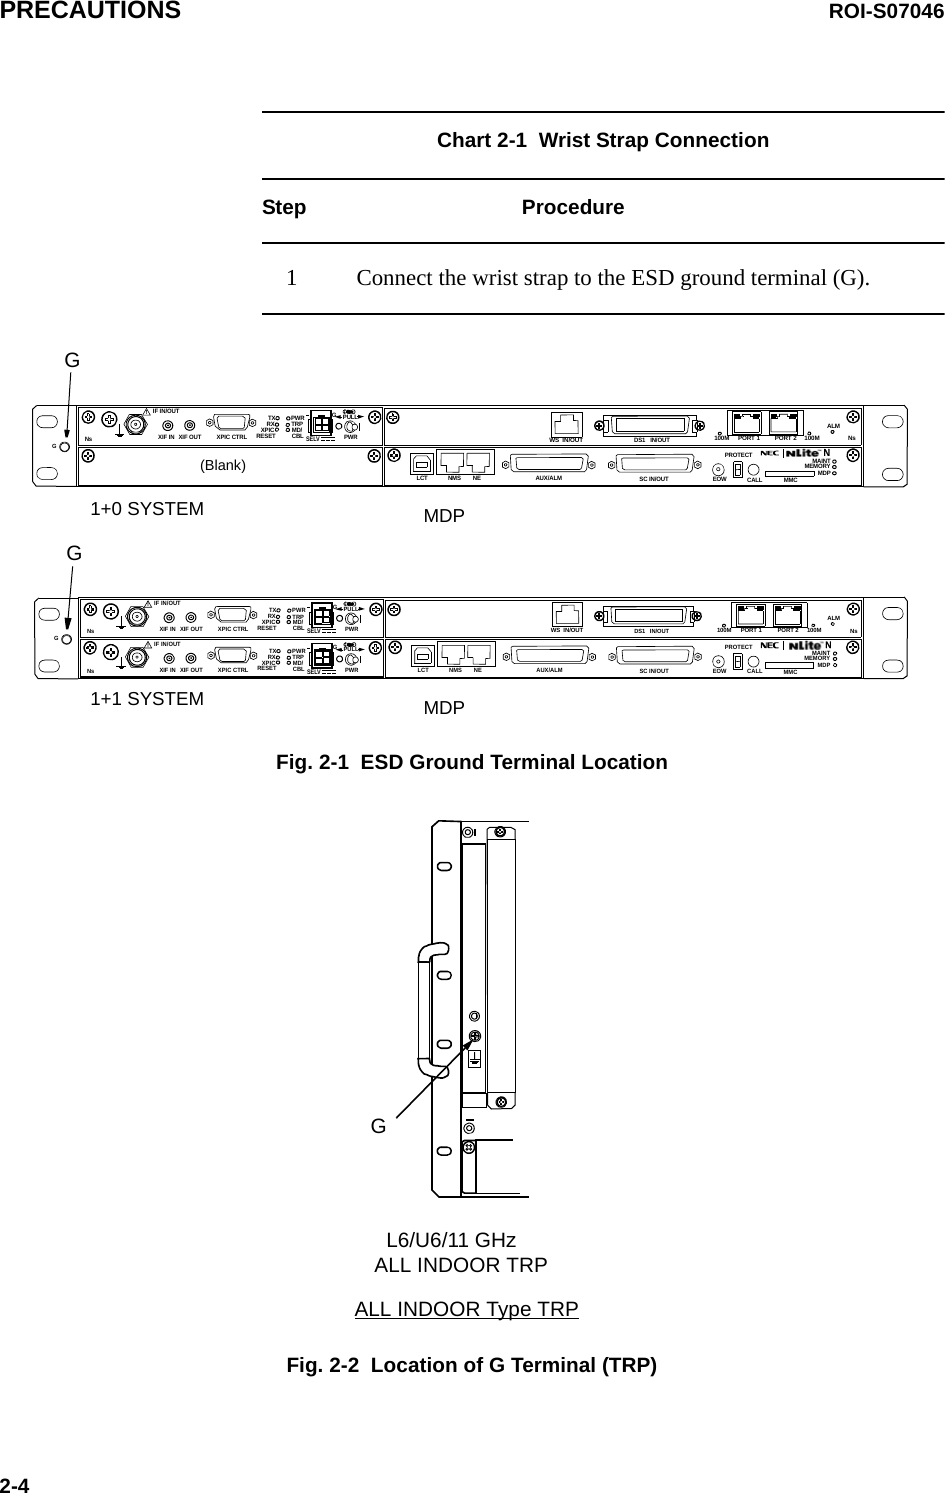 PRECAUTIONS ROI-S070462-4Chart 2-1  Wrist Strap ConnectionStep Procedure1 Connect the wrist strap to the ESD ground terminal (G).Fig. 2-1  ESD Ground Terminal LocationFig. 2-2  Location of G Terminal (TRP)1+0 SYSTEM1+1 SYSTEM       MDPGG(Blank)      MDPSELV!AUX/ALMLCT NMS NE SC IN/OUT EOWPROTECTCALL MMCMAINTMEMORYMDPXIF IN XIF OUTIF IN/OUT TXRXRESETXPIC CTRL XPICPWRTRPMD/CBL PWRPULLGGALM100M PORT 1 PORT 2 100M NsNs DS1   IN/OUTWS  IN/OUTNSELV!AUX/ALMLCT NMS NE SC IN/OUT EOWPROTECTCALL MMCMAINTMEMORYMDPXIF IN XIF OUTIF IN/OUT TXRXRESETXPIC CTRL XPICPWRTRPMD/CBL PWRPULLGSELV!XIF IN XIF OUTIF IN/OUT TXRXRESETXPIC CTRL XPICPWRTRPMD/CBL PWRPULLGGALM100M PORT 1 PORT 2 100MNsNsWS  IN/OUT NsNDS1   IN/OUTDS1 IN/OUT (CH1 to CH8)GALL INDOOR Type TRPALL INDOOR TRPL6/U6/11 GHz